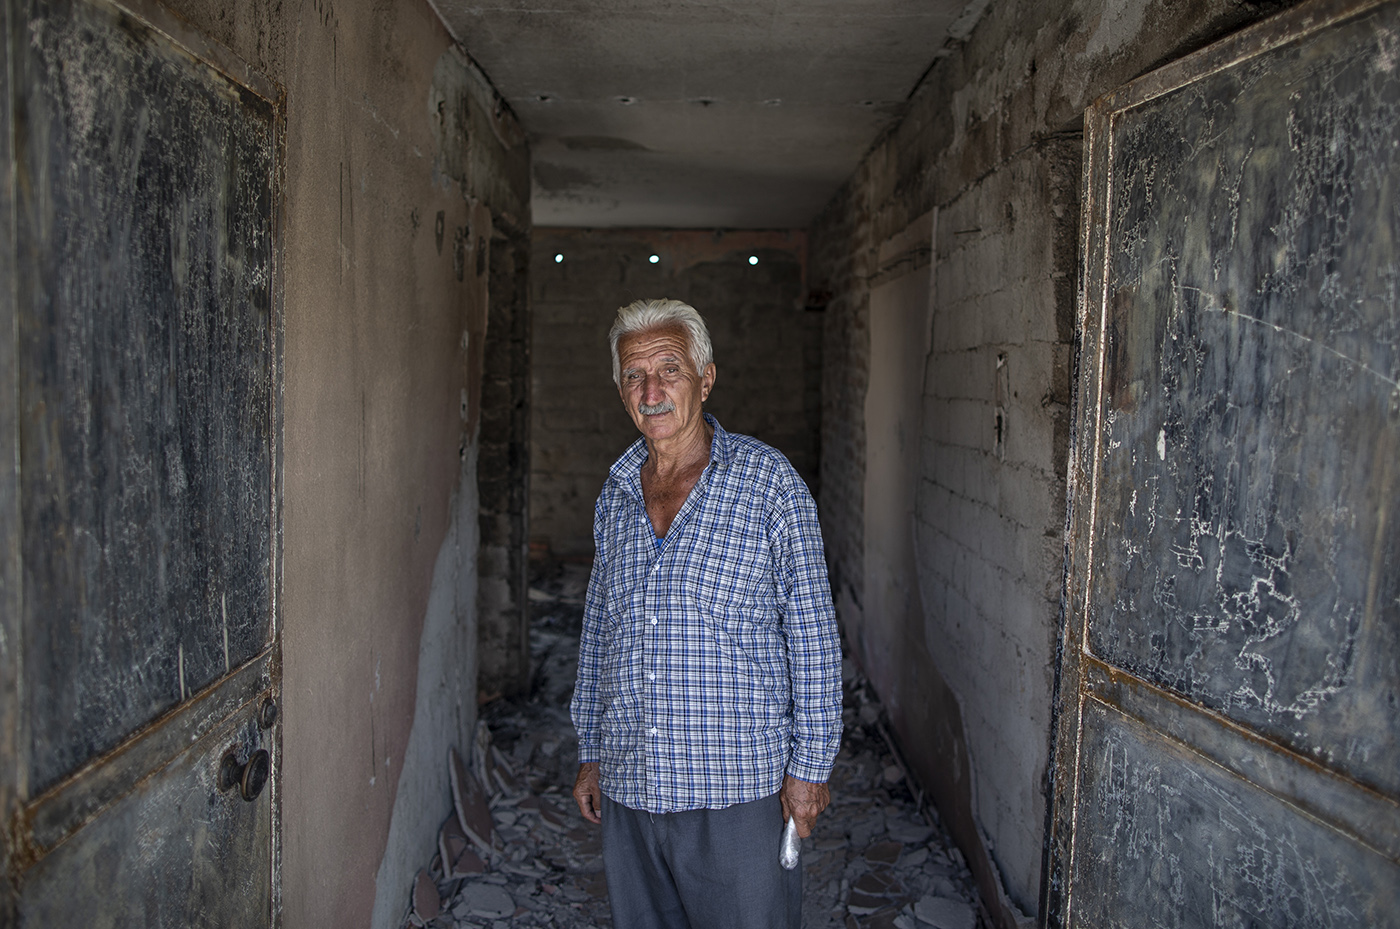 A man waits in his burnt house after a wildfire at the Evrenseki village of the Manavgat district of Antalya, Turkey, 10 August 2021.